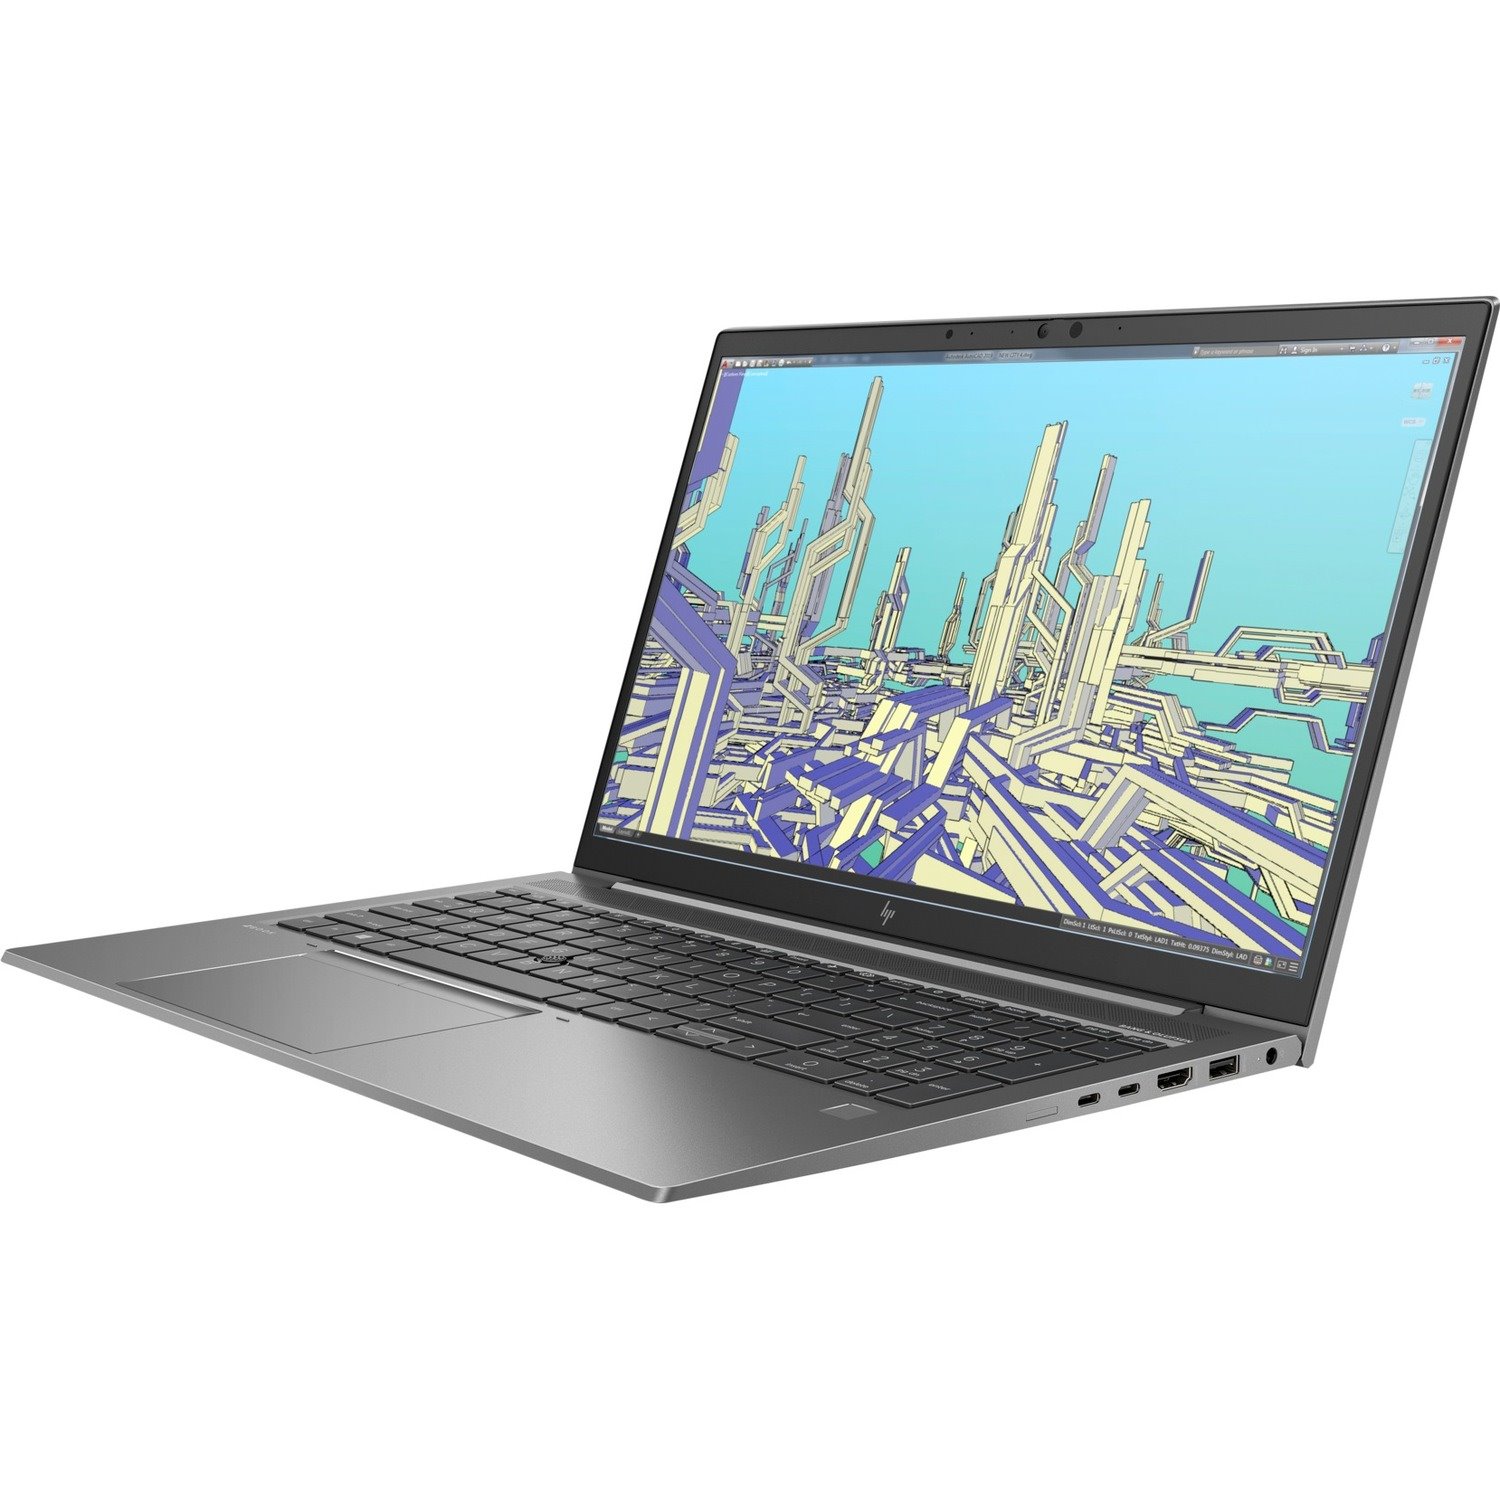 HP ZBook Firefly 15 G8 LTE 15.6" Touchscreen Mobile Workstation - Full HD - 1920 x 1080 - Intel Core i7 11th Gen i7-1185G7 Quad-core (4 Core) - 32 GB Total RAM - 512 GB SSD